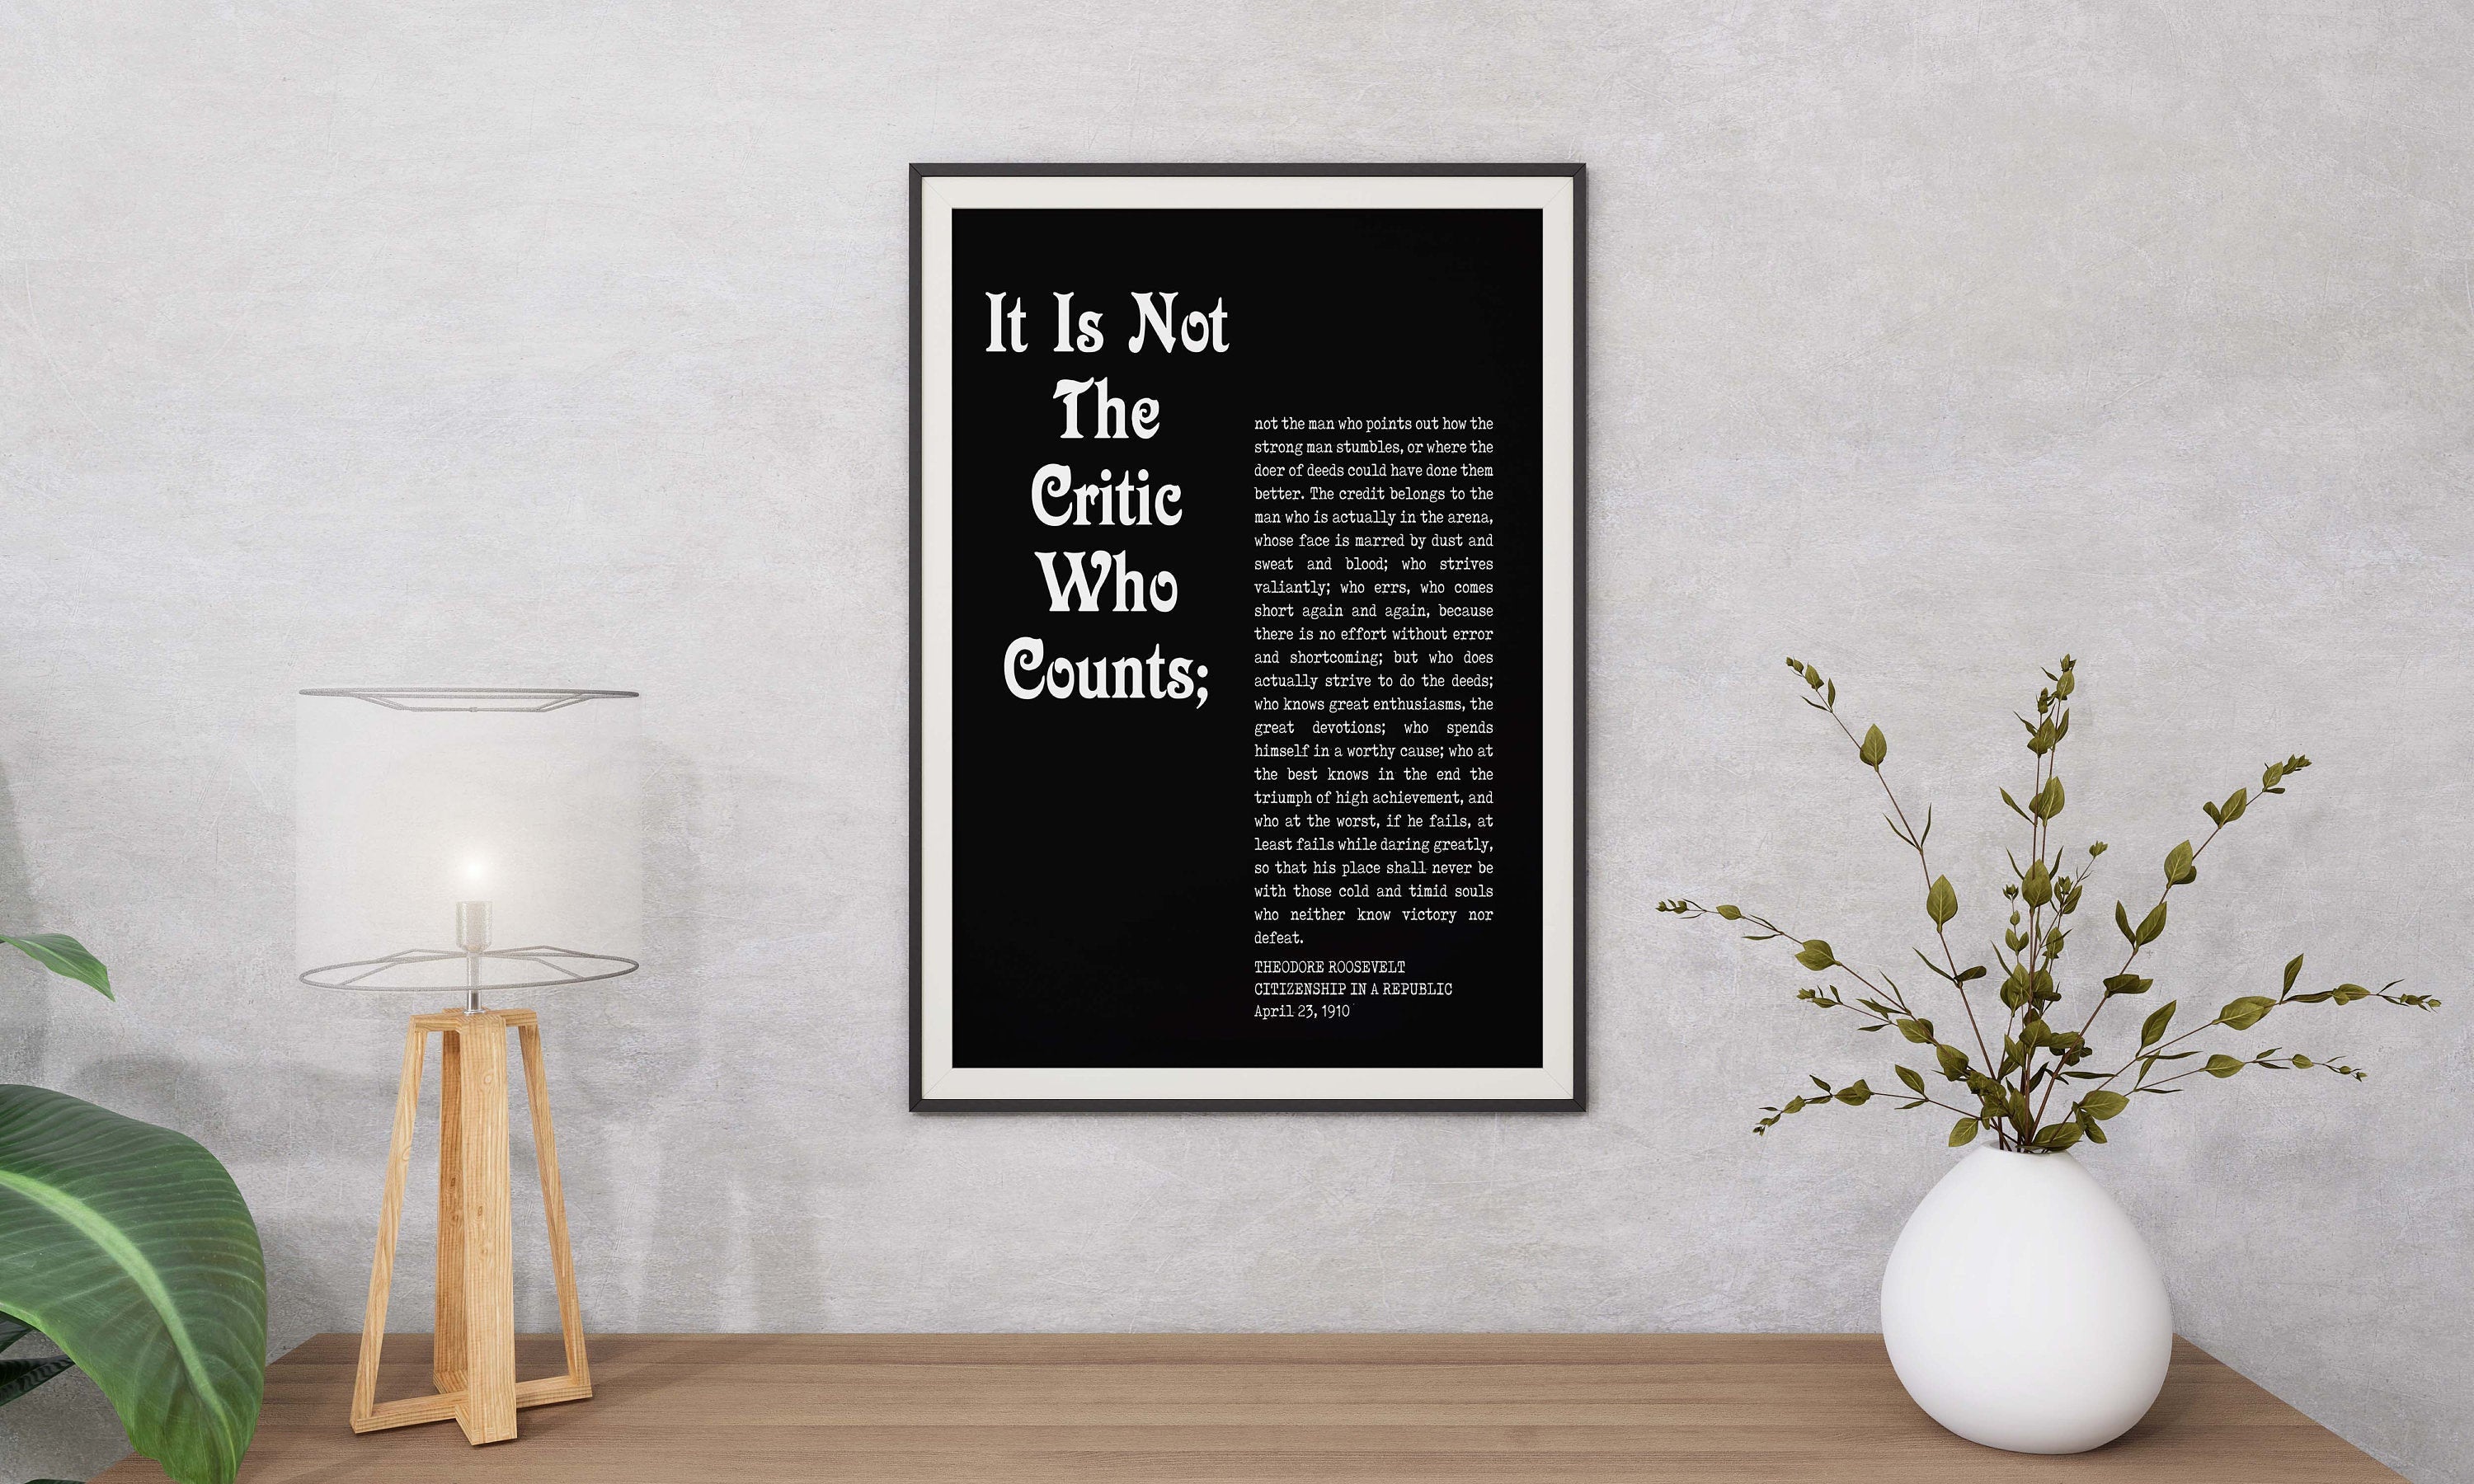 Daring Greatly Man In The Arena Theodore Roosevelt Office Wall Decor, Inspirational Quotes Unframed Wall Art In Black And White